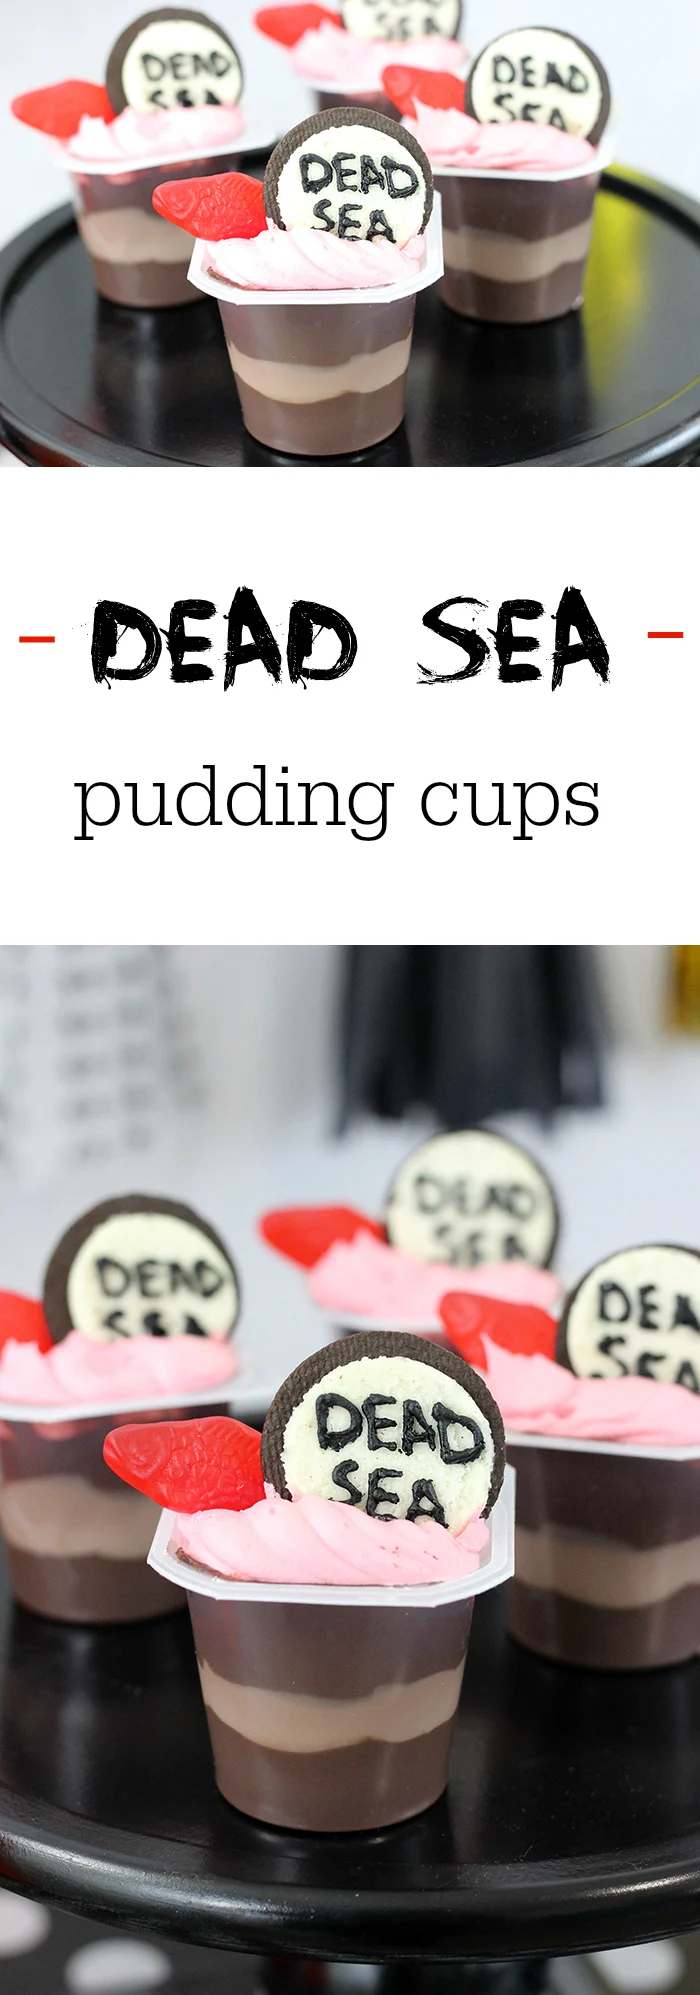 Creepy Halloween Party Treats. From haunted pudding cups, to blood spattered OREO cookies and more. Make Dead Sea Pudding Cups with OREO, Swedish Fish and Snack Pack Pudding Cups.